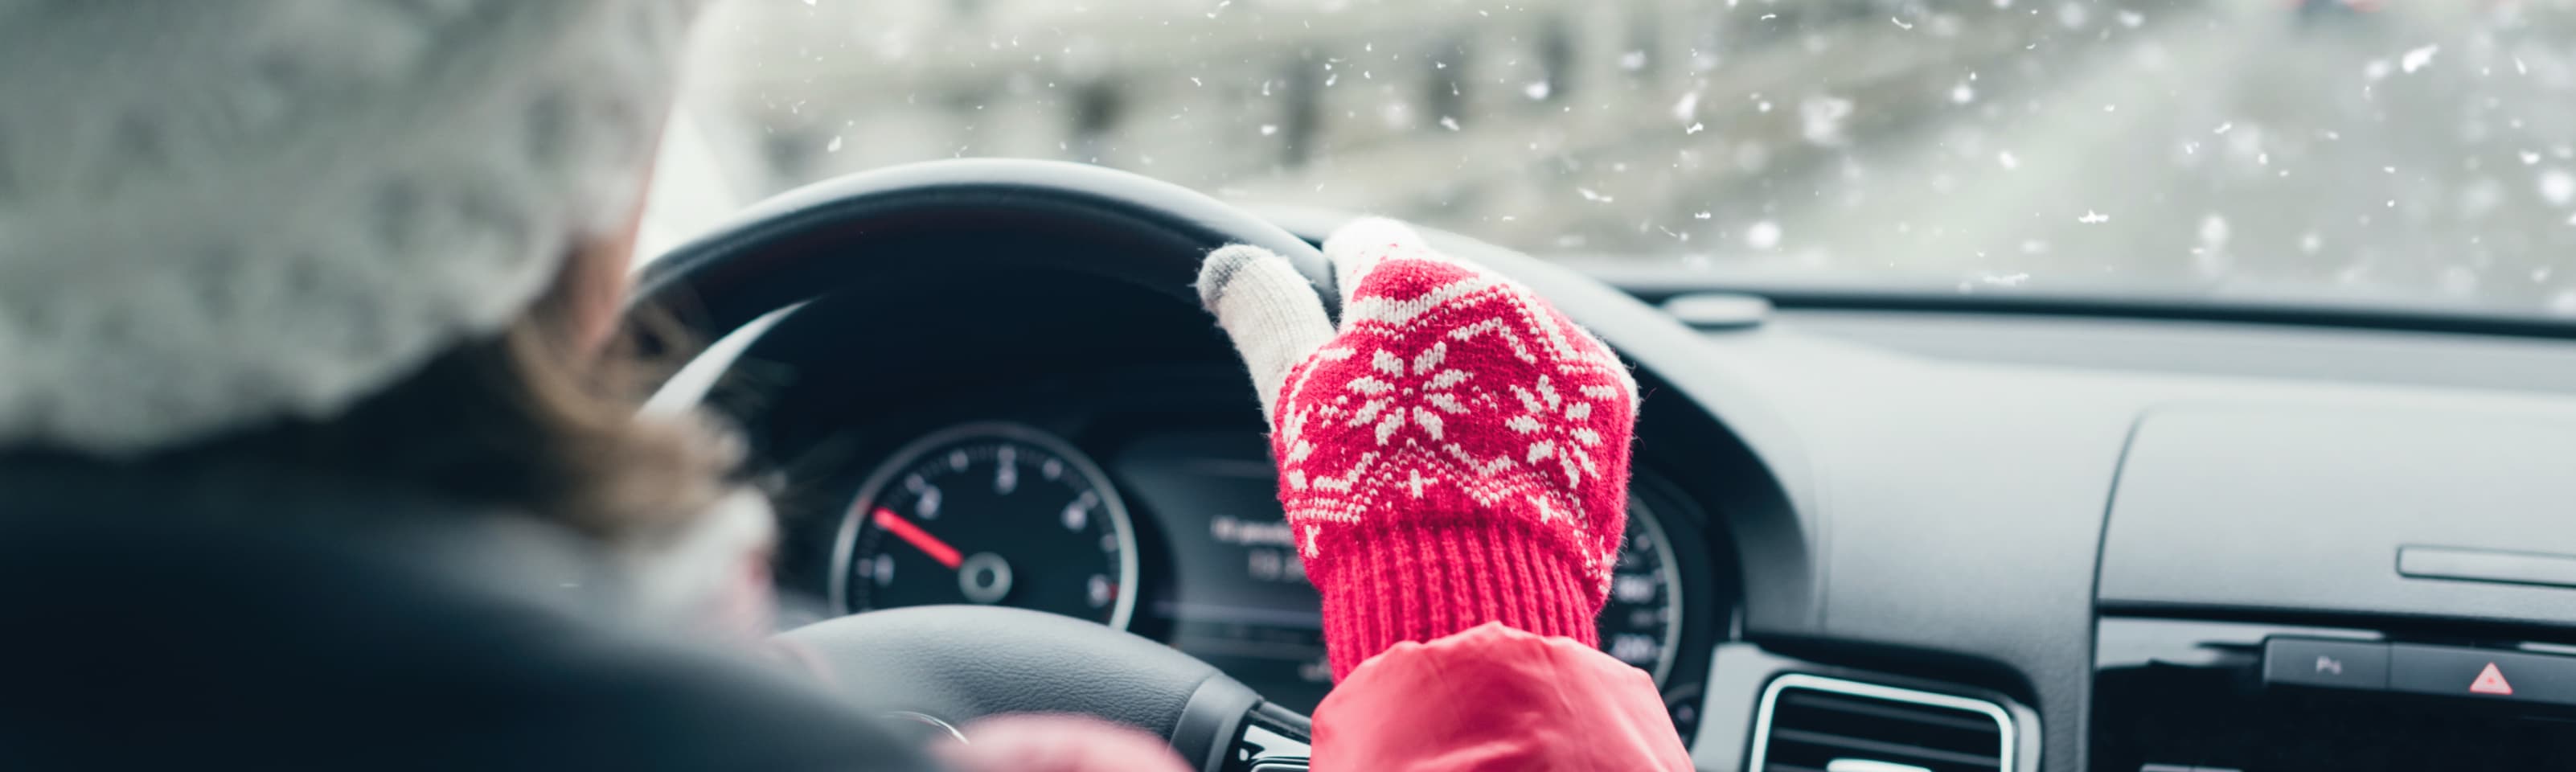 3 reasons to choose a rental car for your festive journeys 